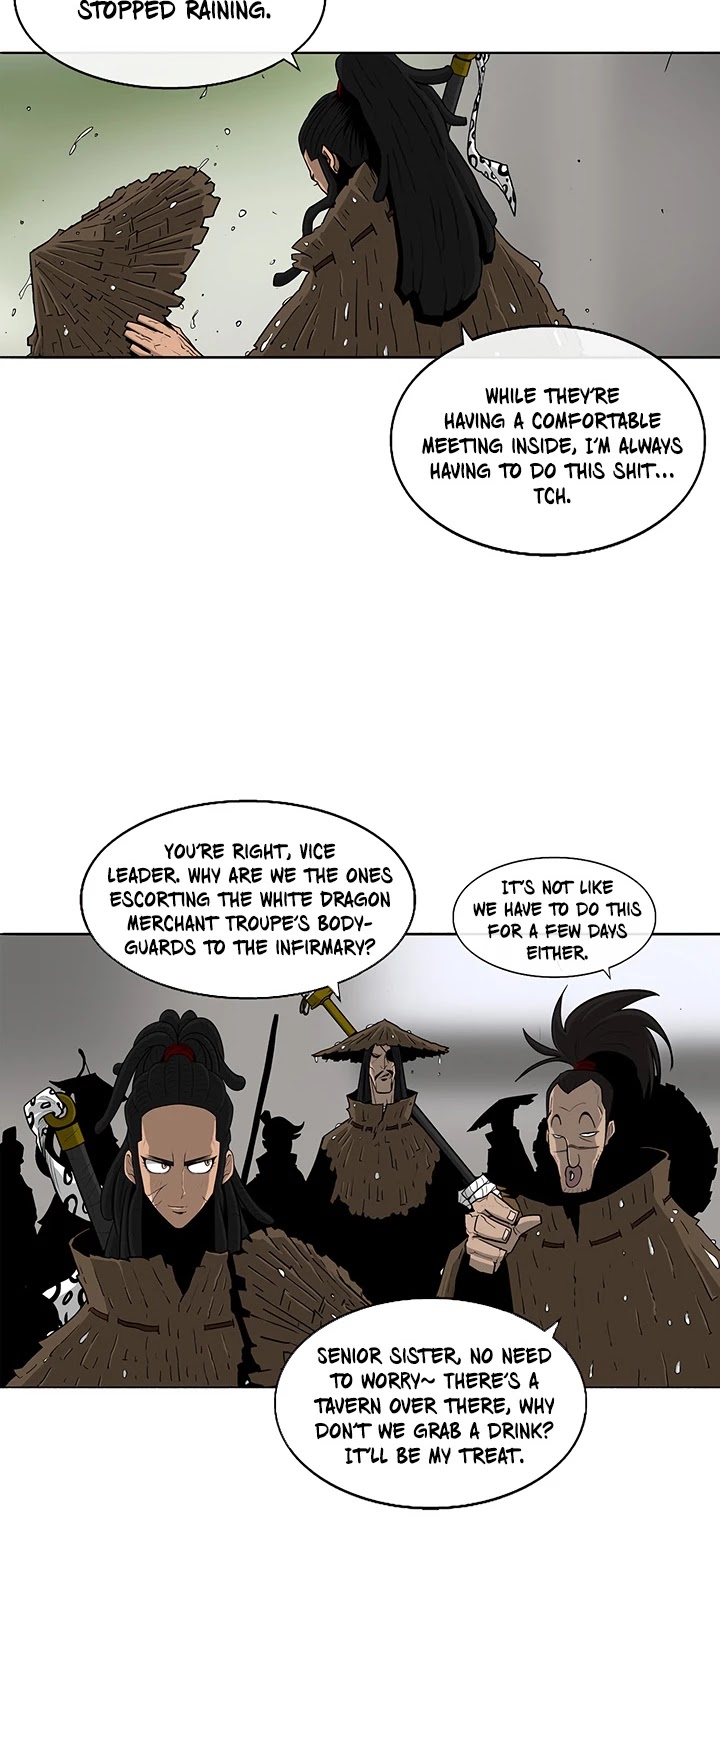 Legend Of The Northern Blade Chapter 37